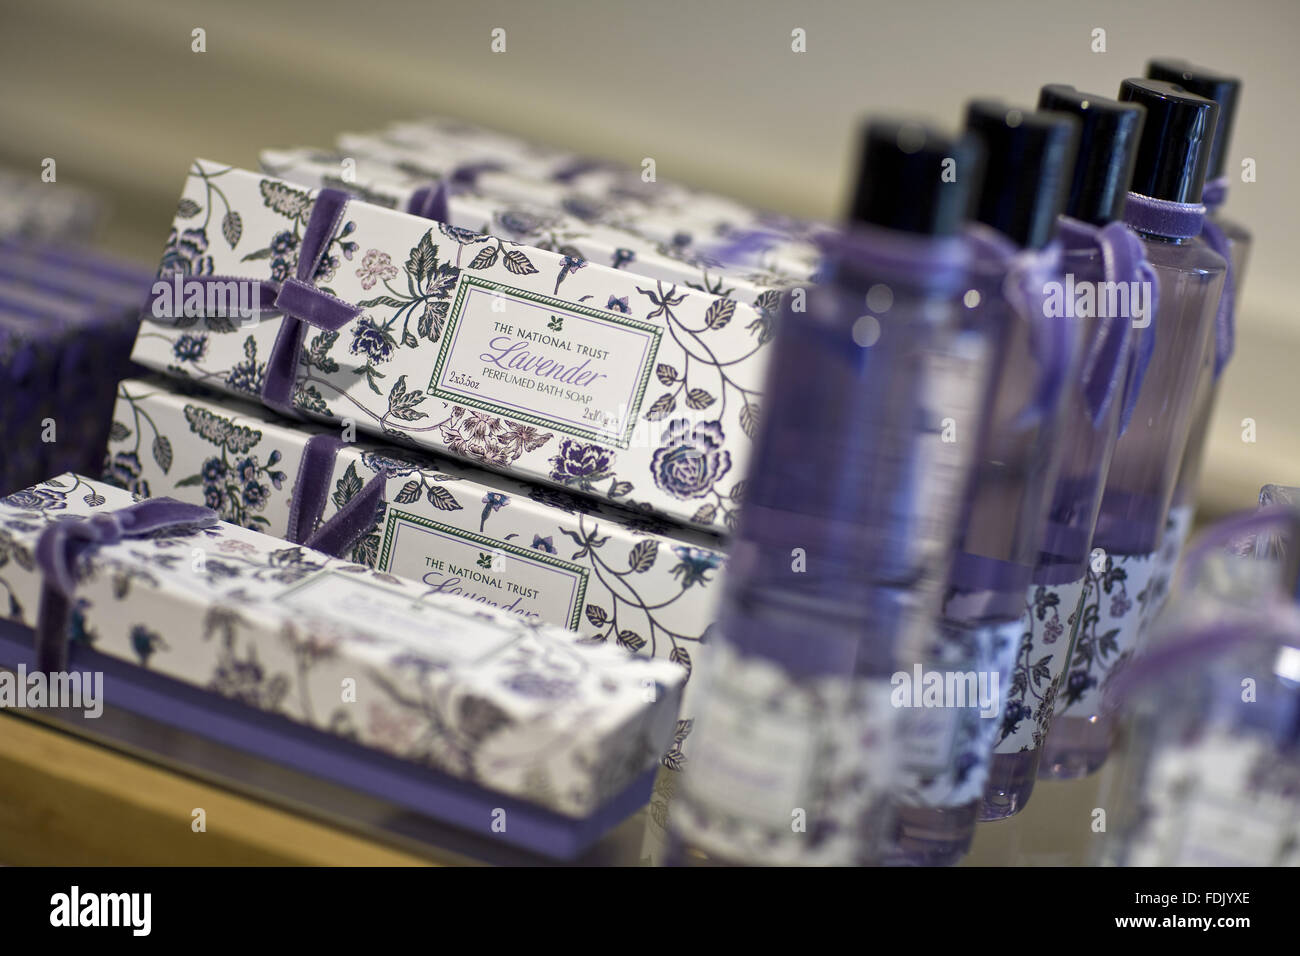 Lavender products on sale in The National Trust shop at Polesden Lacey, Surrey. Stock Photo